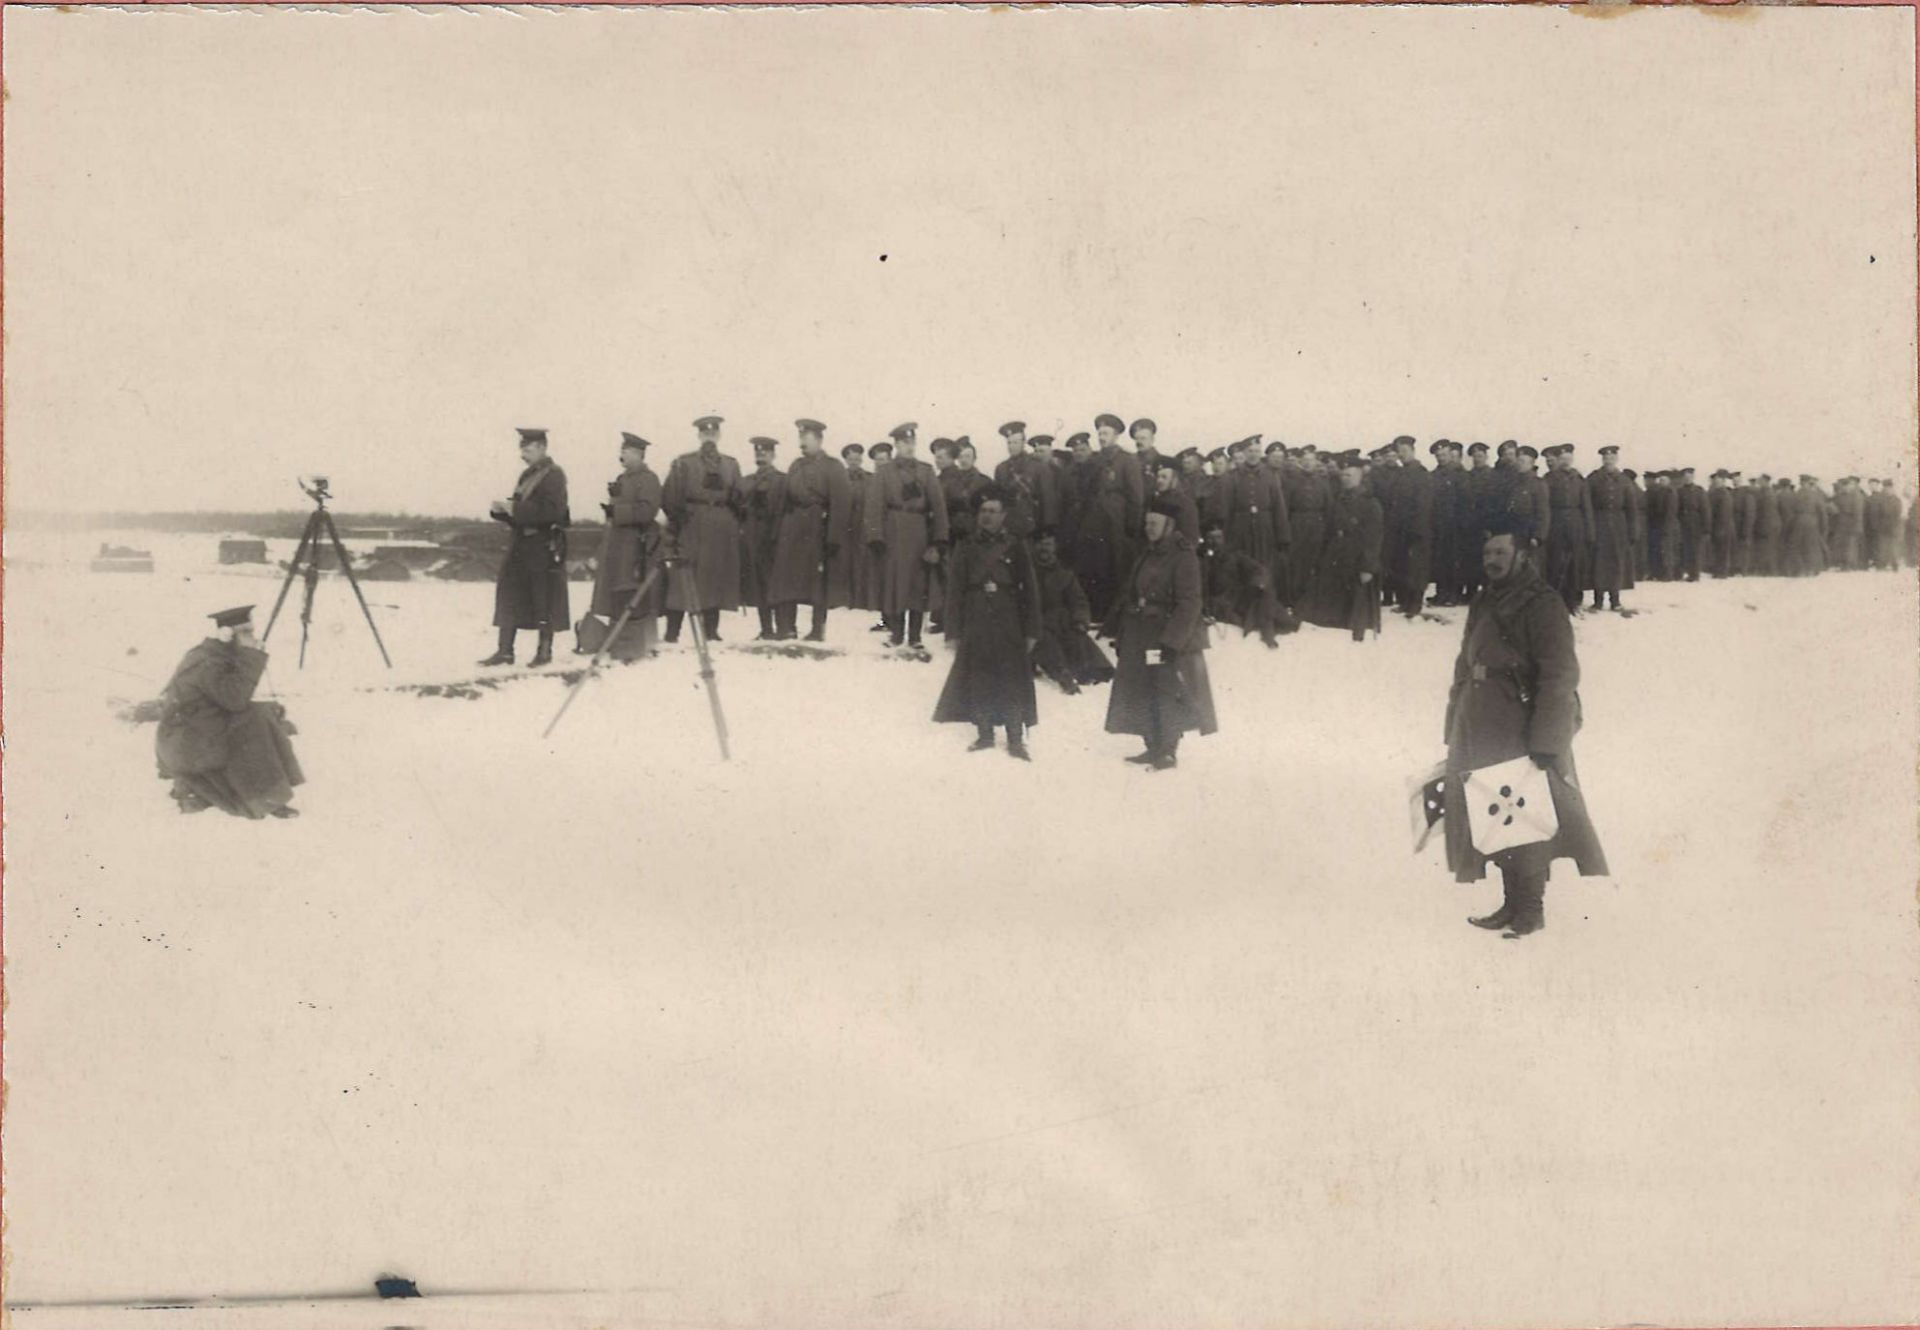 [Russian Empire]. Photograph "A column of soldiers during a shooting session on the Neva. Lifeguards